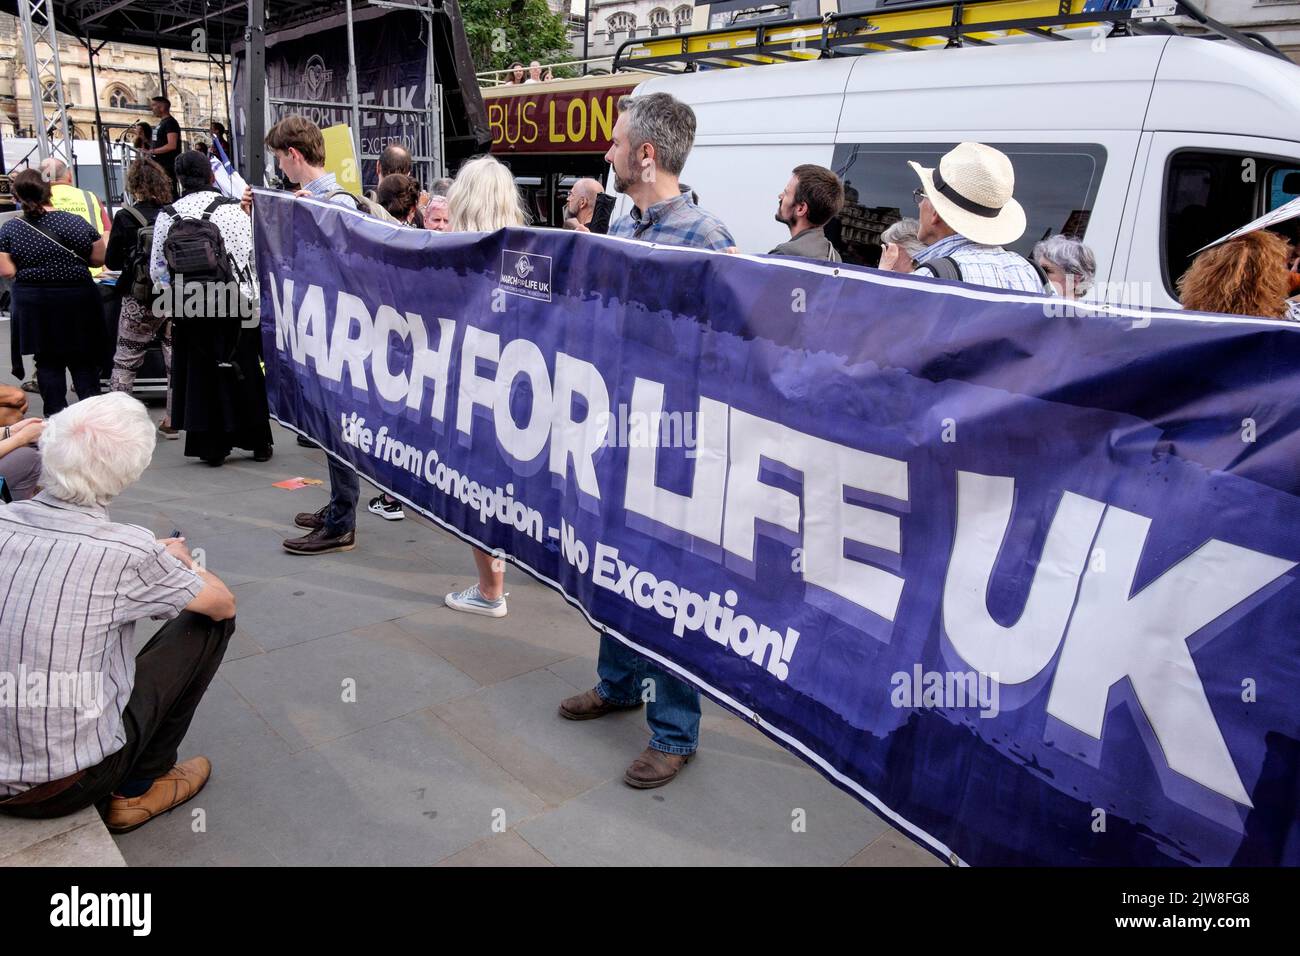 London, UK. 3 September 2022. Members of anti-abortion groups rally in Parliament Square, Westminster following an annual 'March For Life' in central London. Pro choice abortion campaigners also gather to voice their opposition to the anti-abortion movement. Pictured: Campaigners hold March For Life UK banner at rally in London. Stock Photo